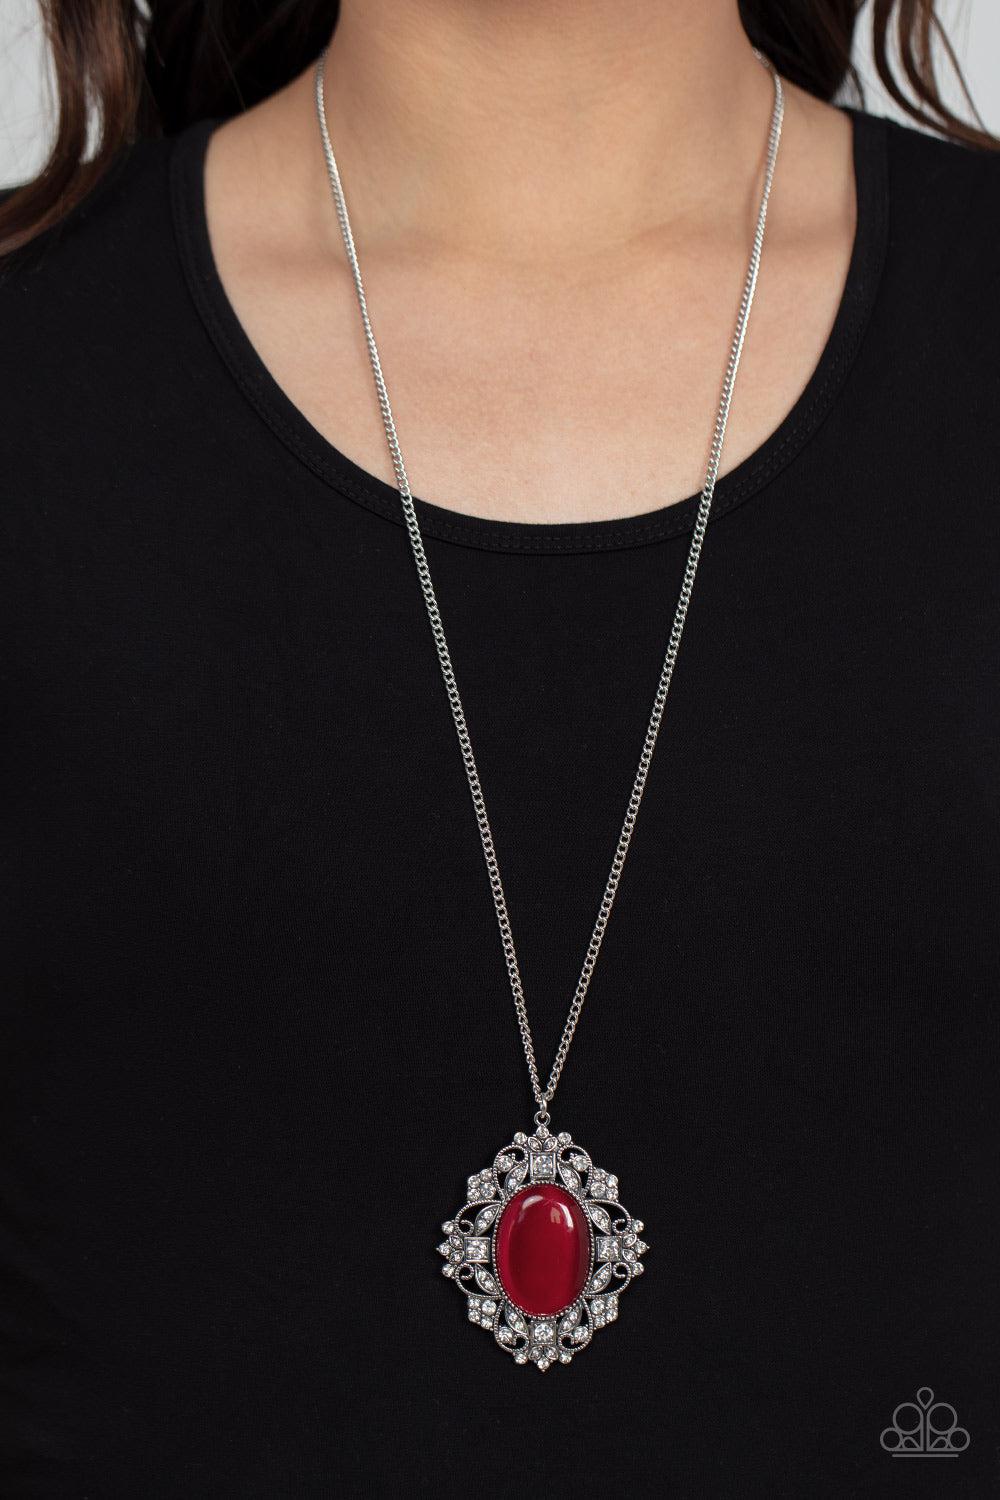 Dream Board Dazzle Red Cat&#39;s Eye Stone Necklace - Paparazzi Accessories-on model - CarasShop.com - $5 Jewelry by Cara Jewels